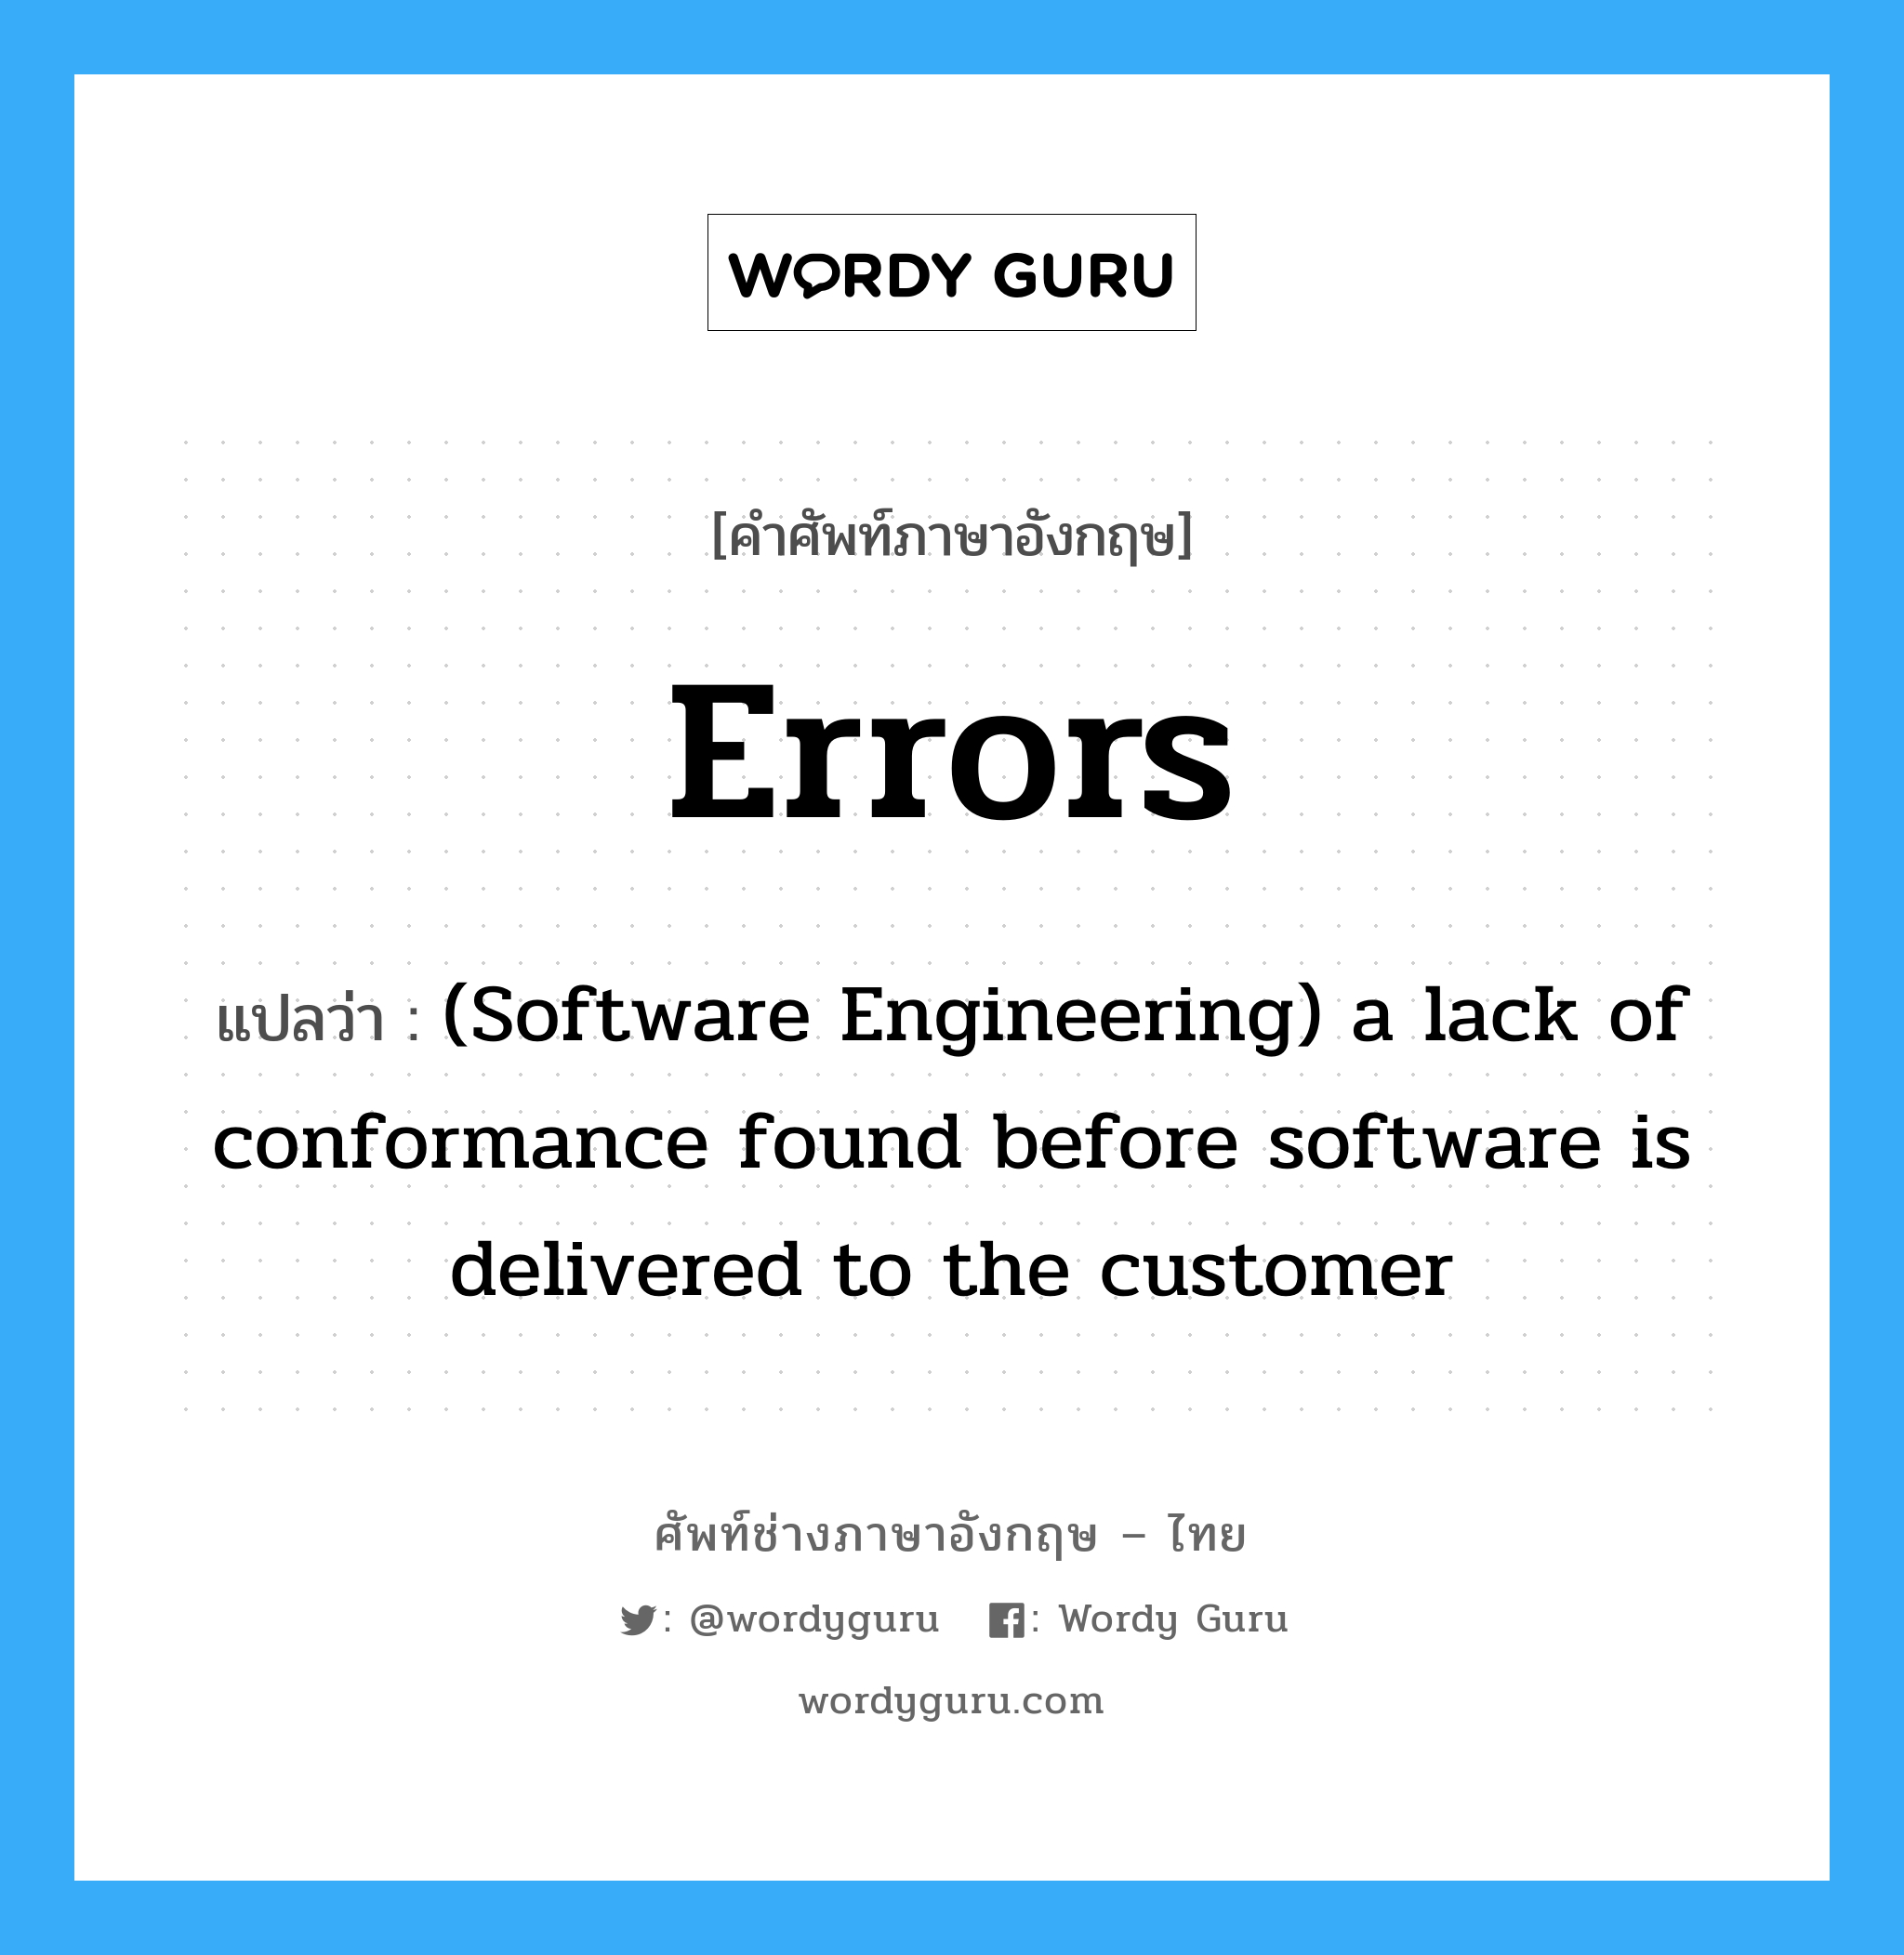 (Software Engineering) a lack of conformance found before software is delivered to the customer ภาษาอังกฤษ?, คำศัพท์ช่างภาษาอังกฤษ - ไทย (Software Engineering) a lack of conformance found before software is delivered to the customer คำศัพท์ภาษาอังกฤษ (Software Engineering) a lack of conformance found before software is delivered to the customer แปลว่า Errors